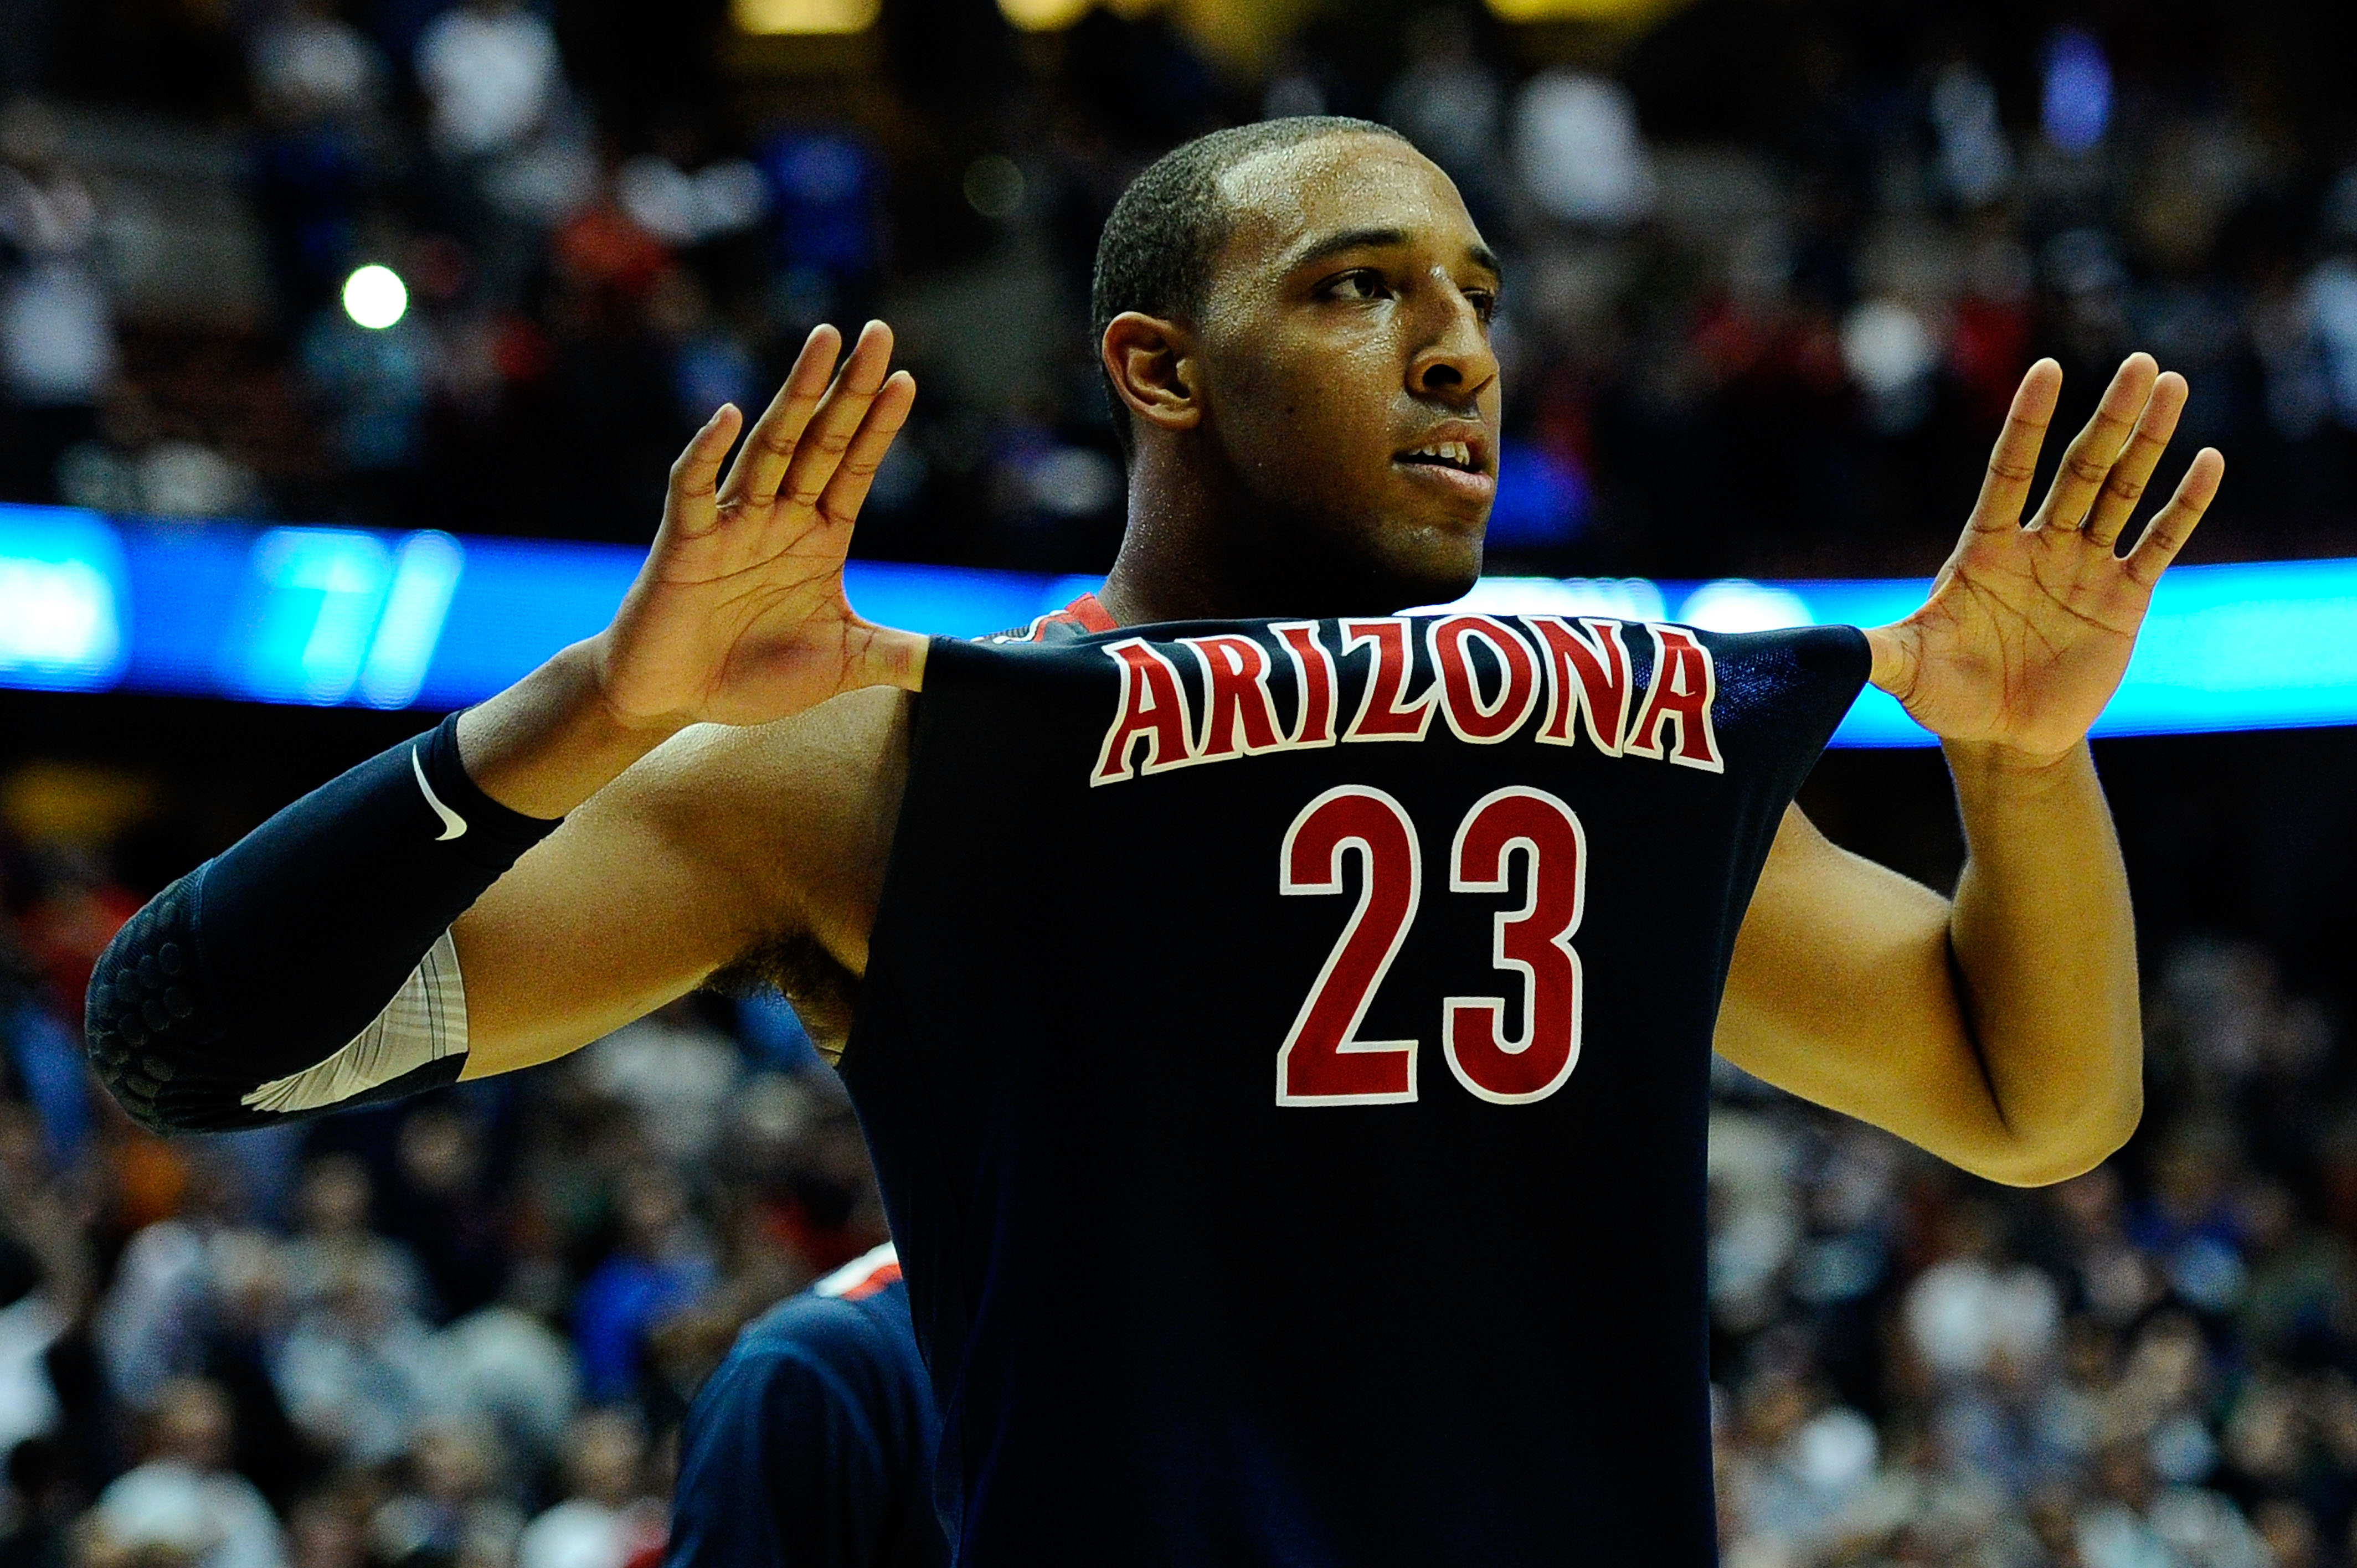 ANAHEIM, CA - MARCH 24:  Derrick Williams #23 of the Arizona Wildcats reacts after defeating the Duke Blue Devils during the west regional semifinal of the 2011 NCAA men's basketball tournament at the Honda Center on March 24, 2011 in Anaheim, California.